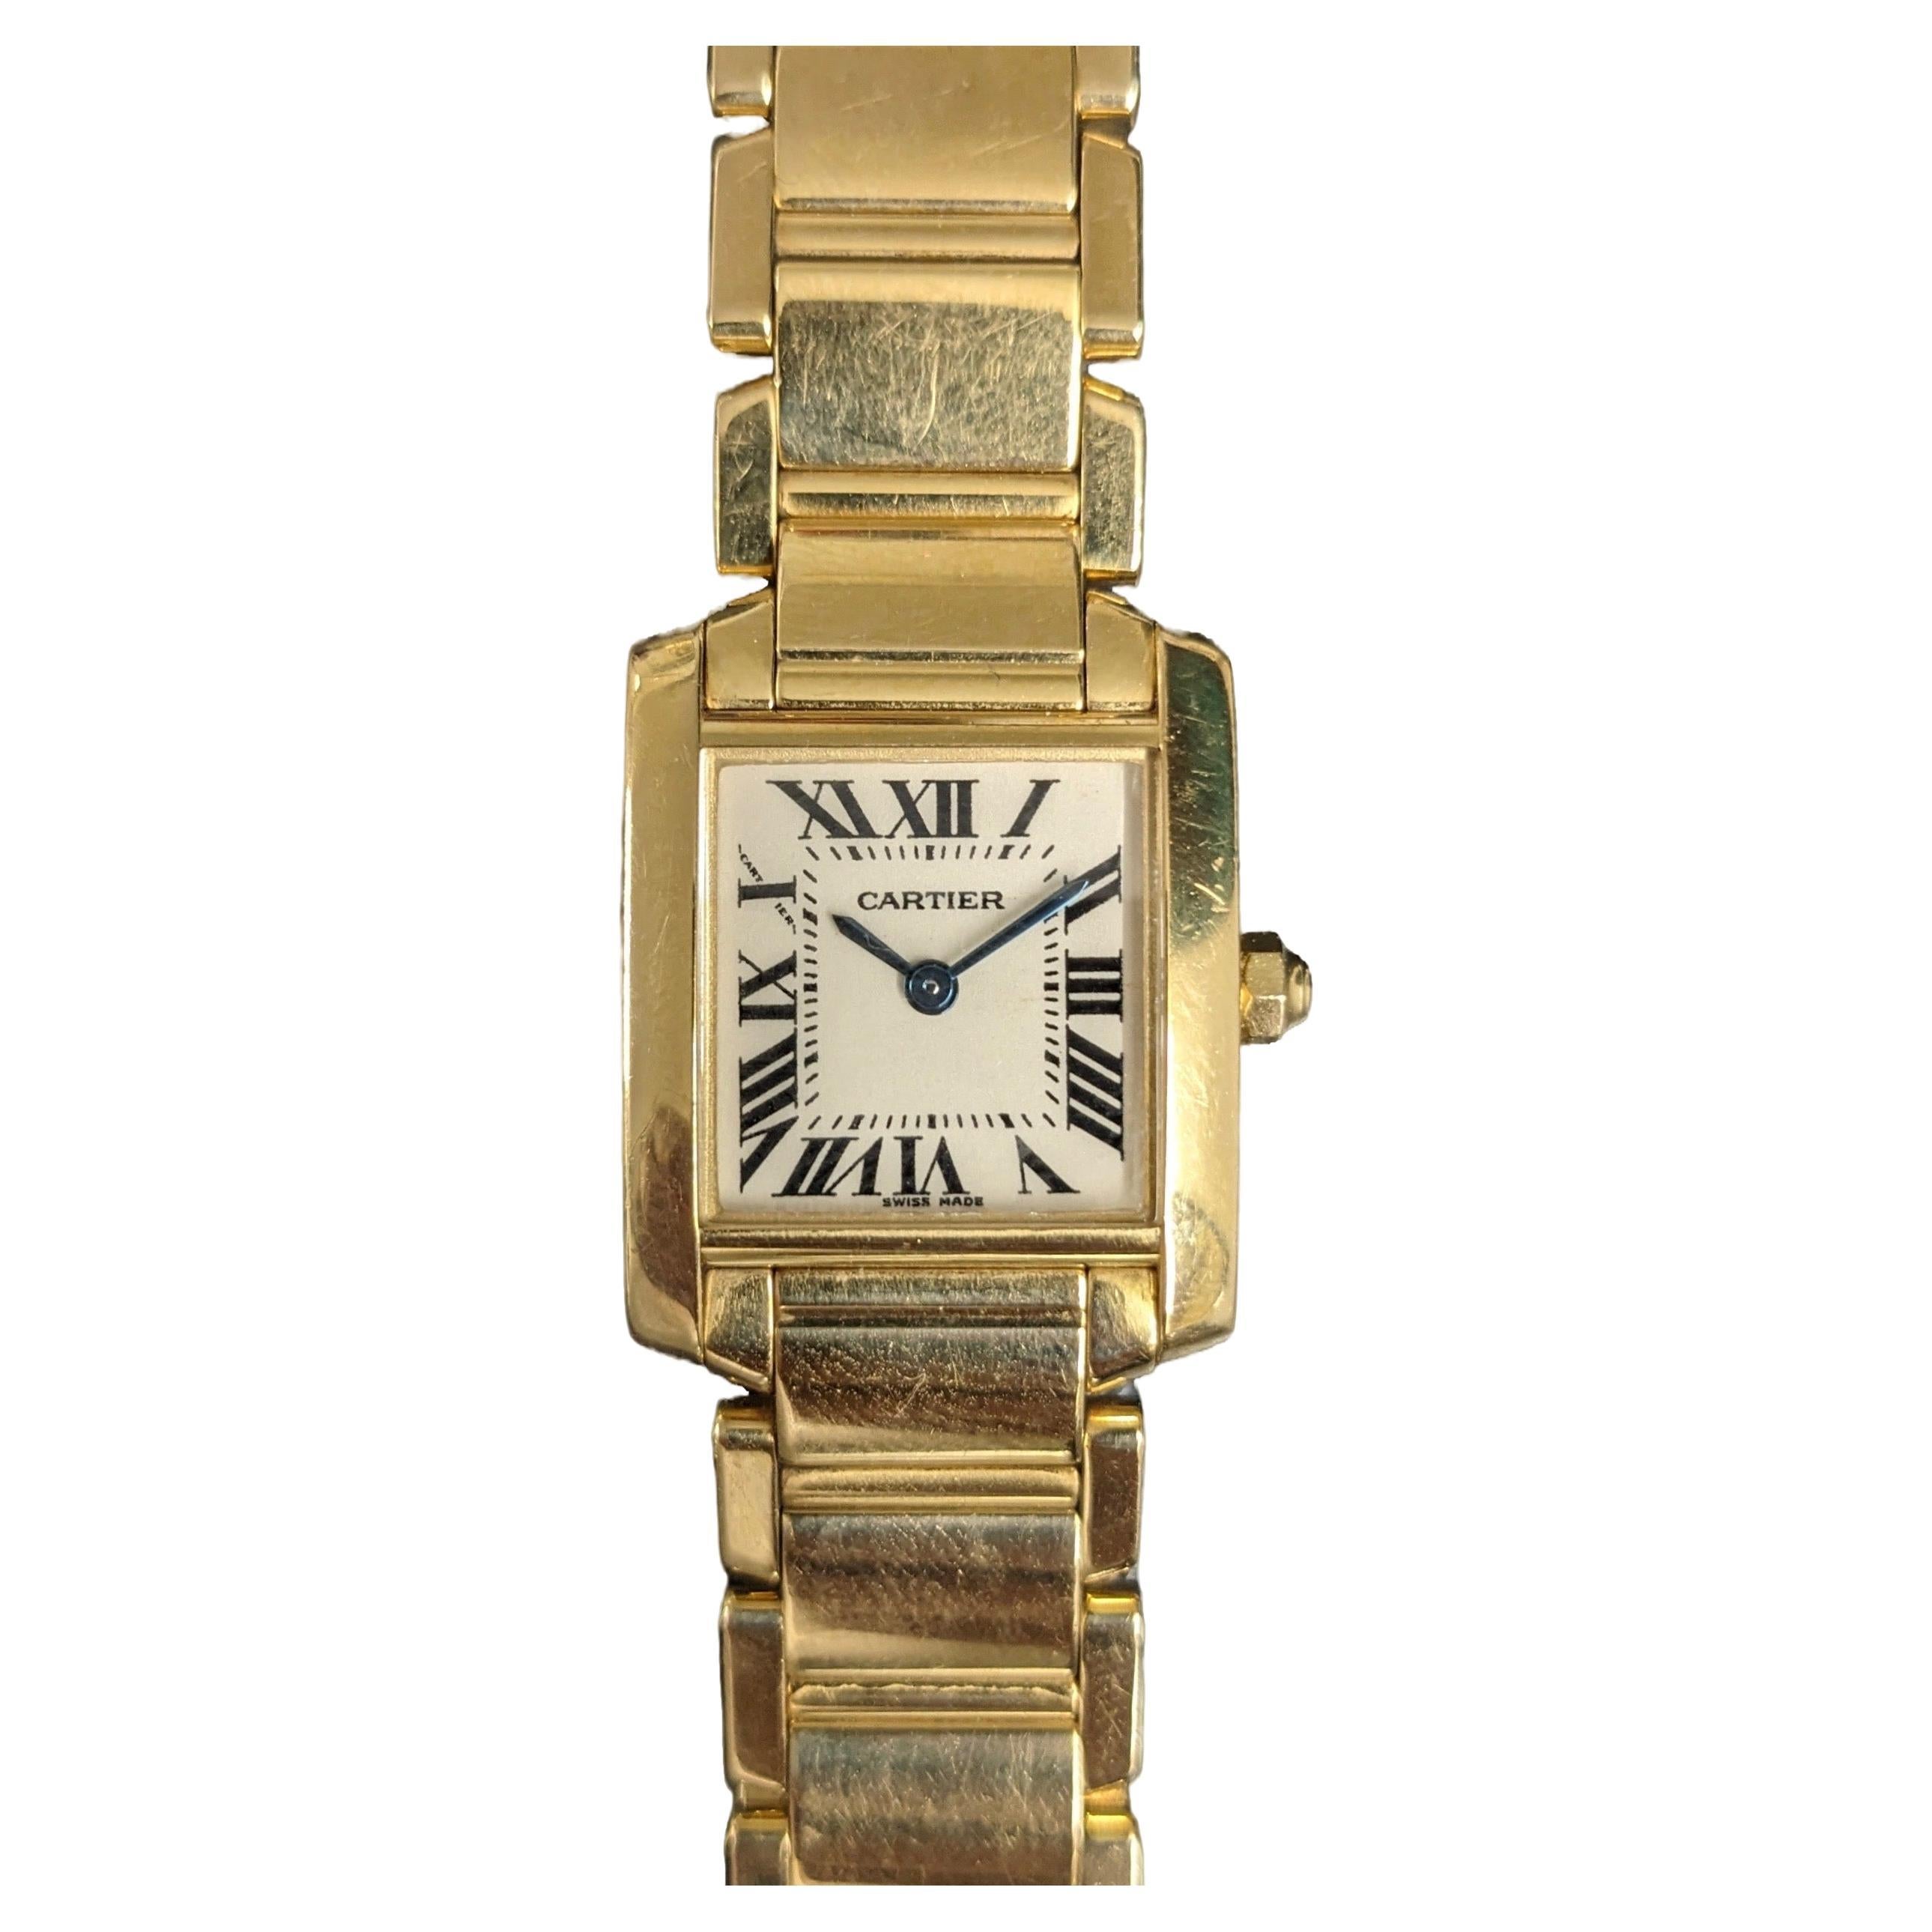 Cartier watch model Tank Francaise in 18k yellow gold reference 2385